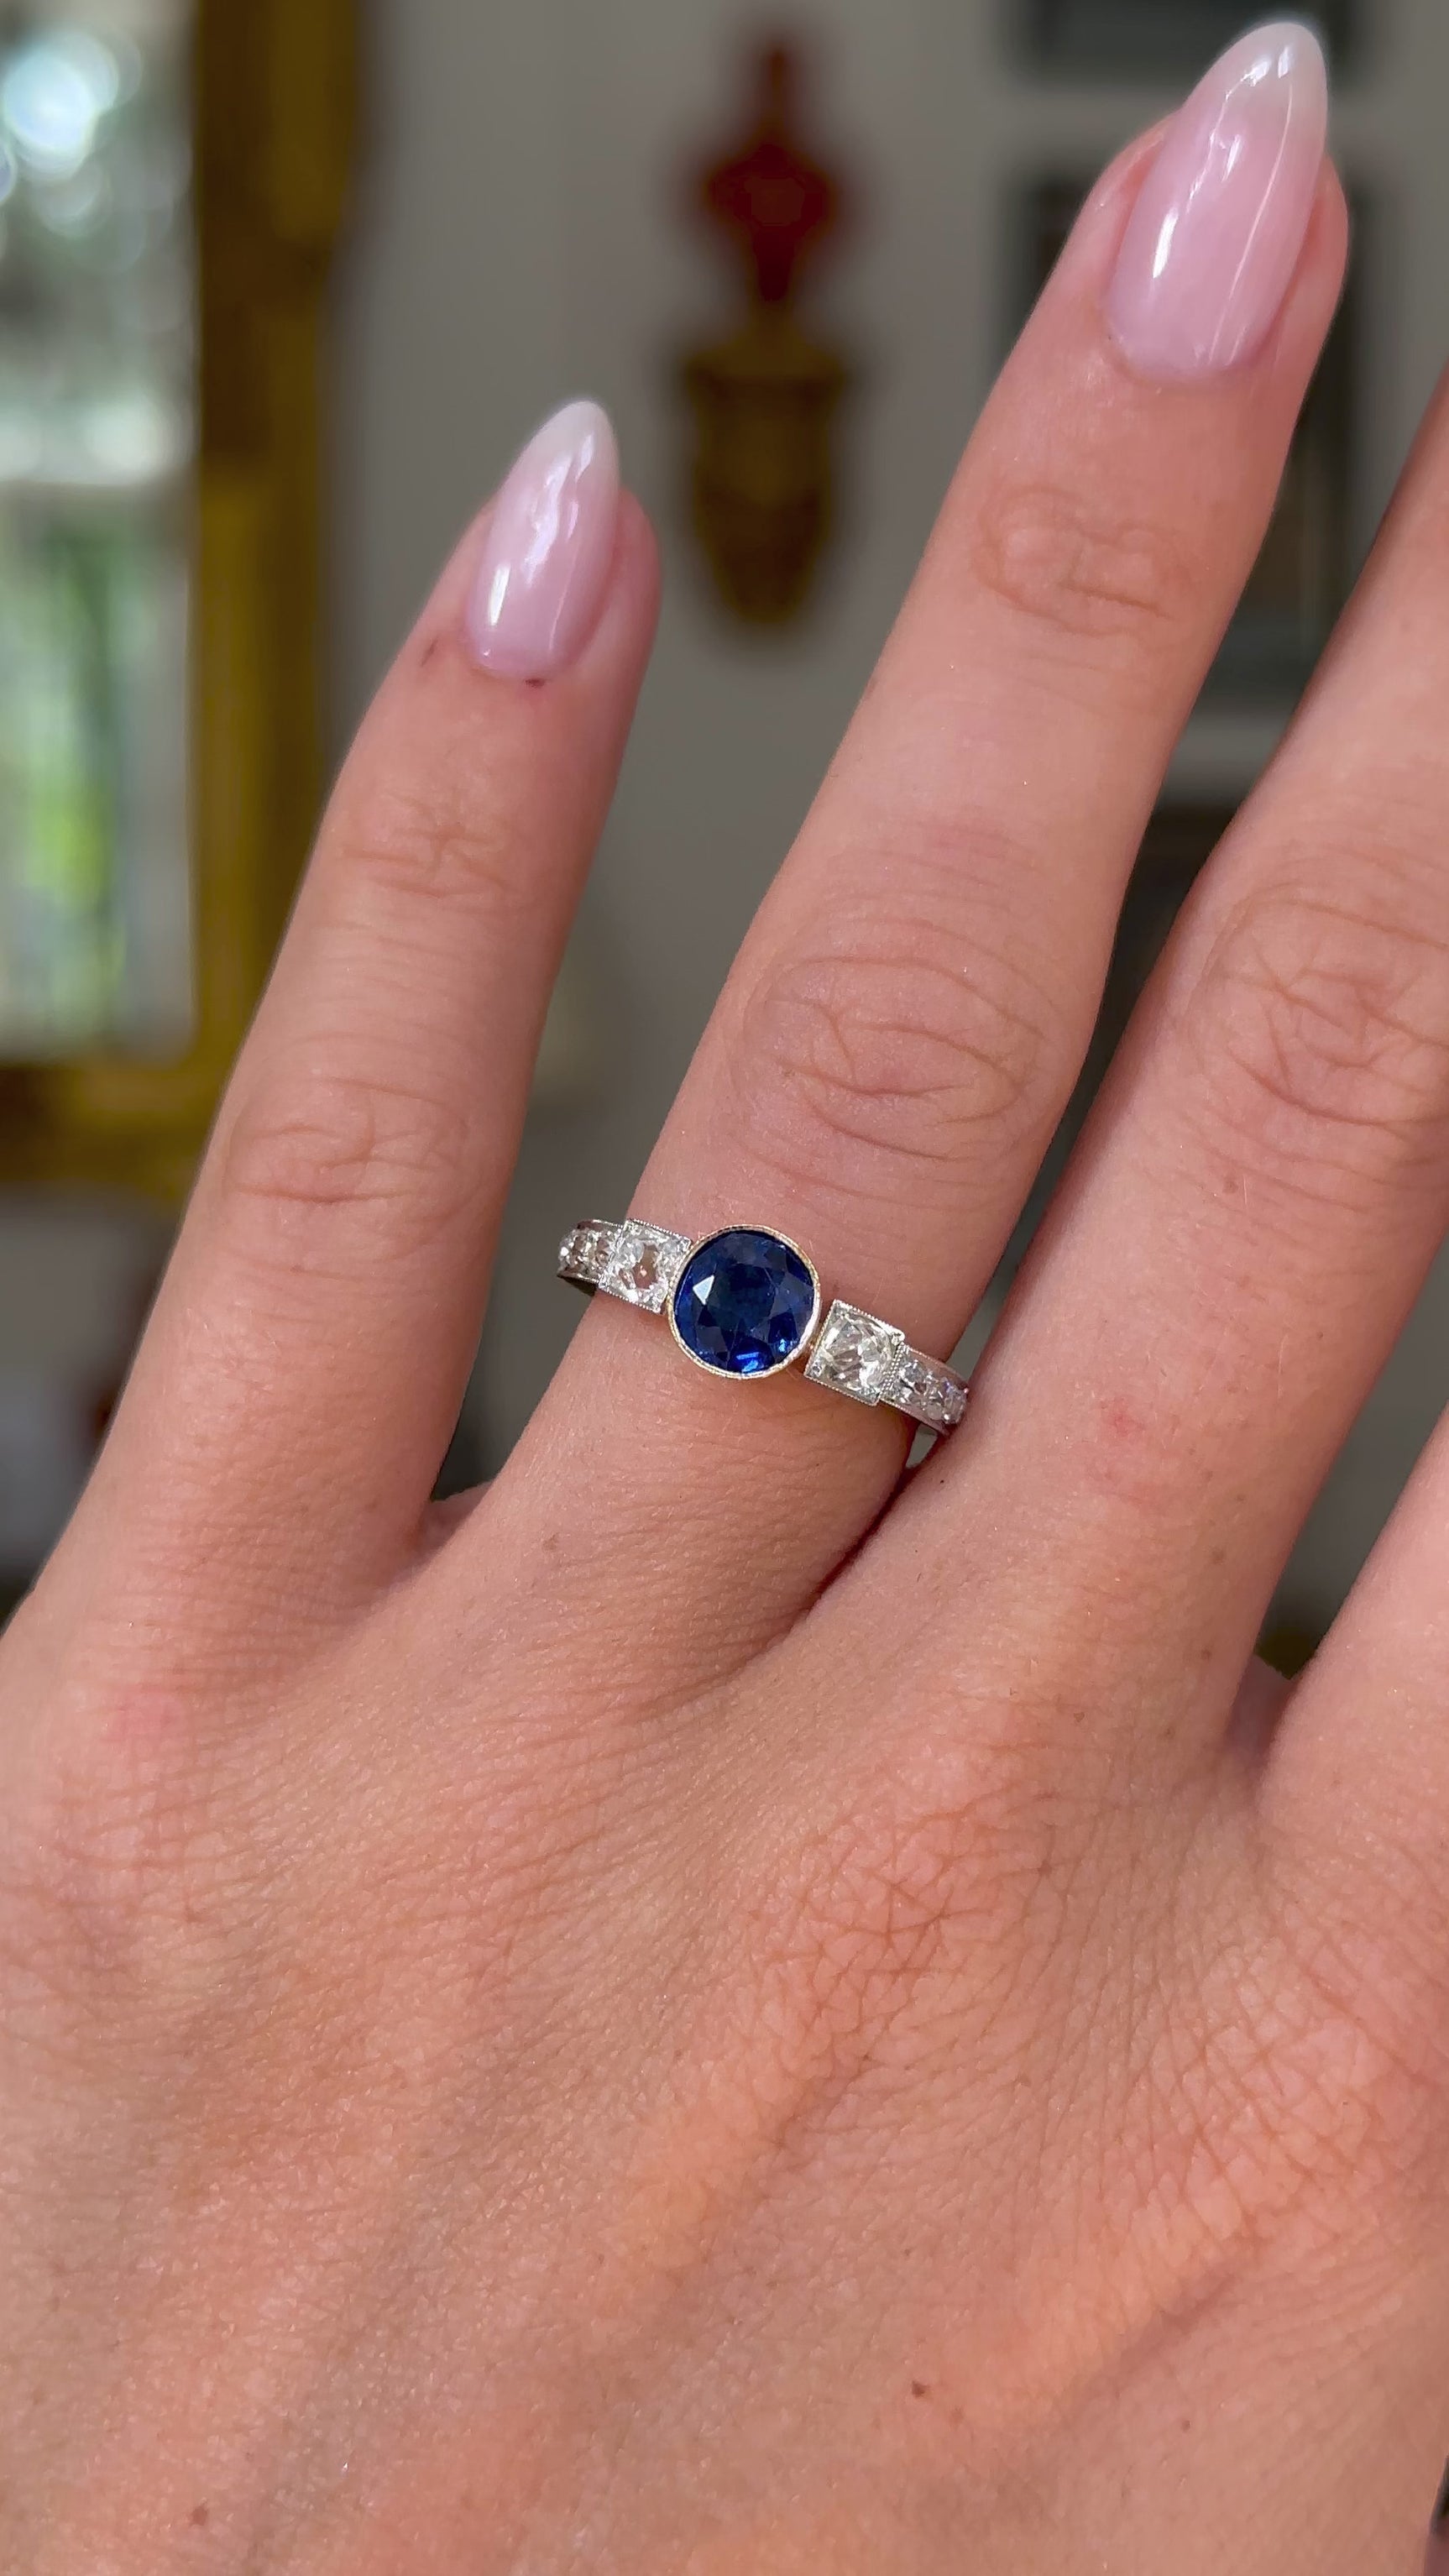 Art Deco sapphire and diamond engagement ring, worn on hand and moved away from lens to give perspective,front view. 